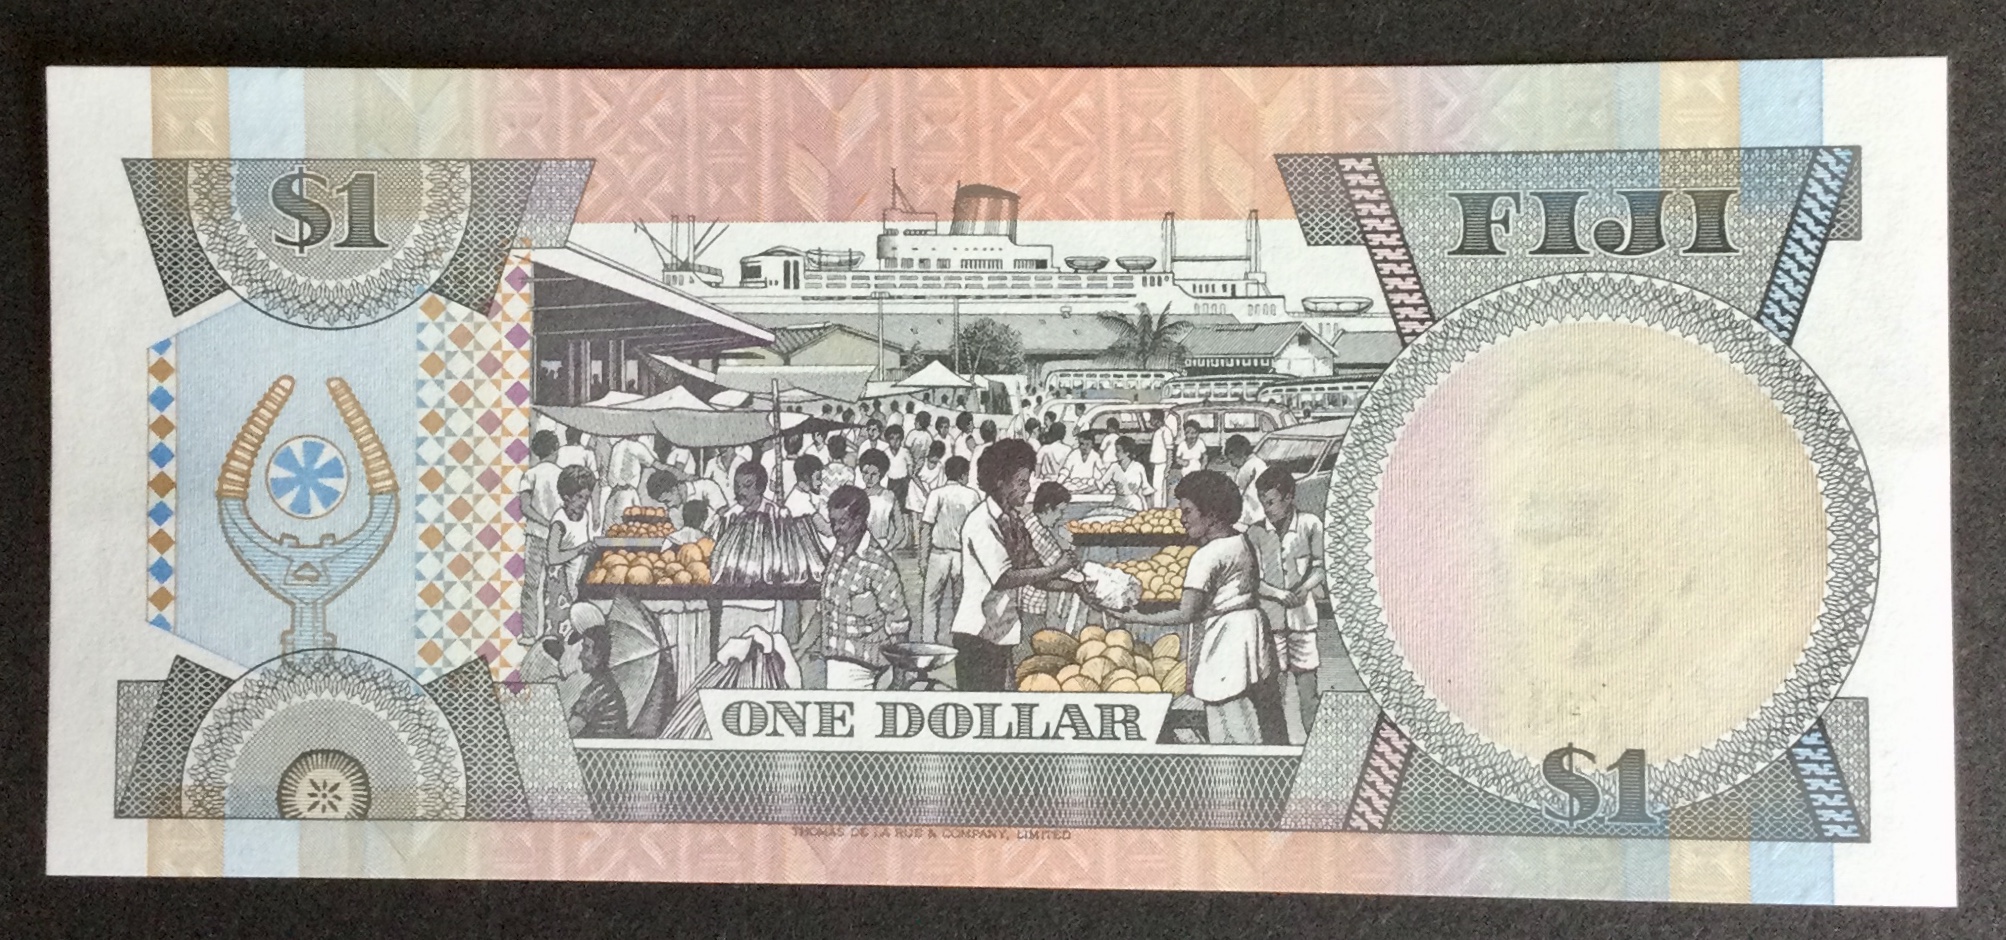 1980’s Fiji One Dollar $1 Banknote - Image 2 of 2